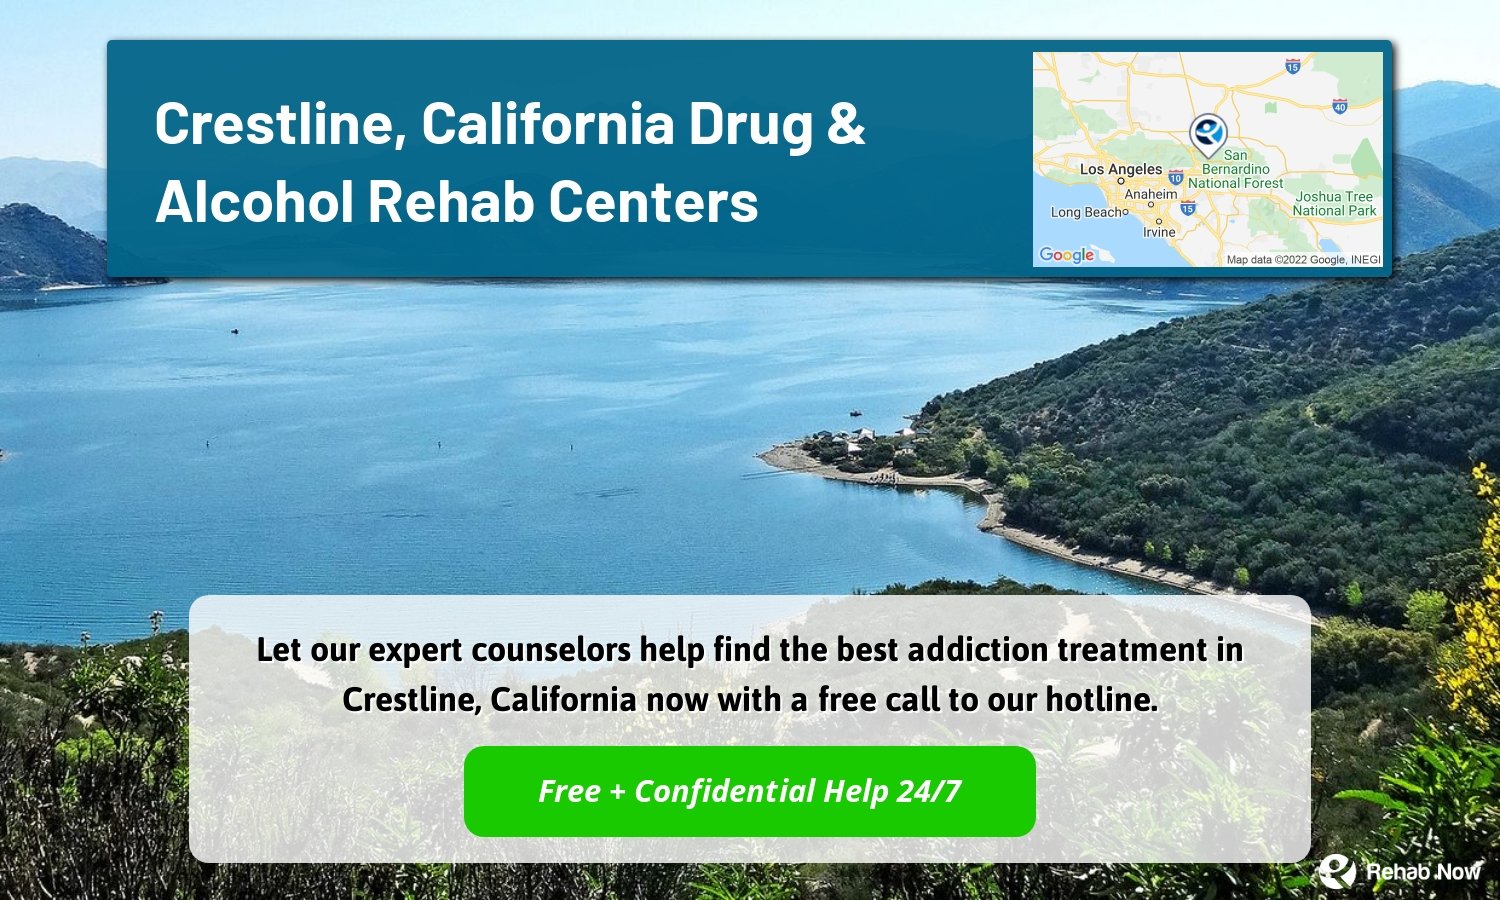 Let our expert counselors help find the best addiction treatment in Crestline, California now with a free call to our hotline.